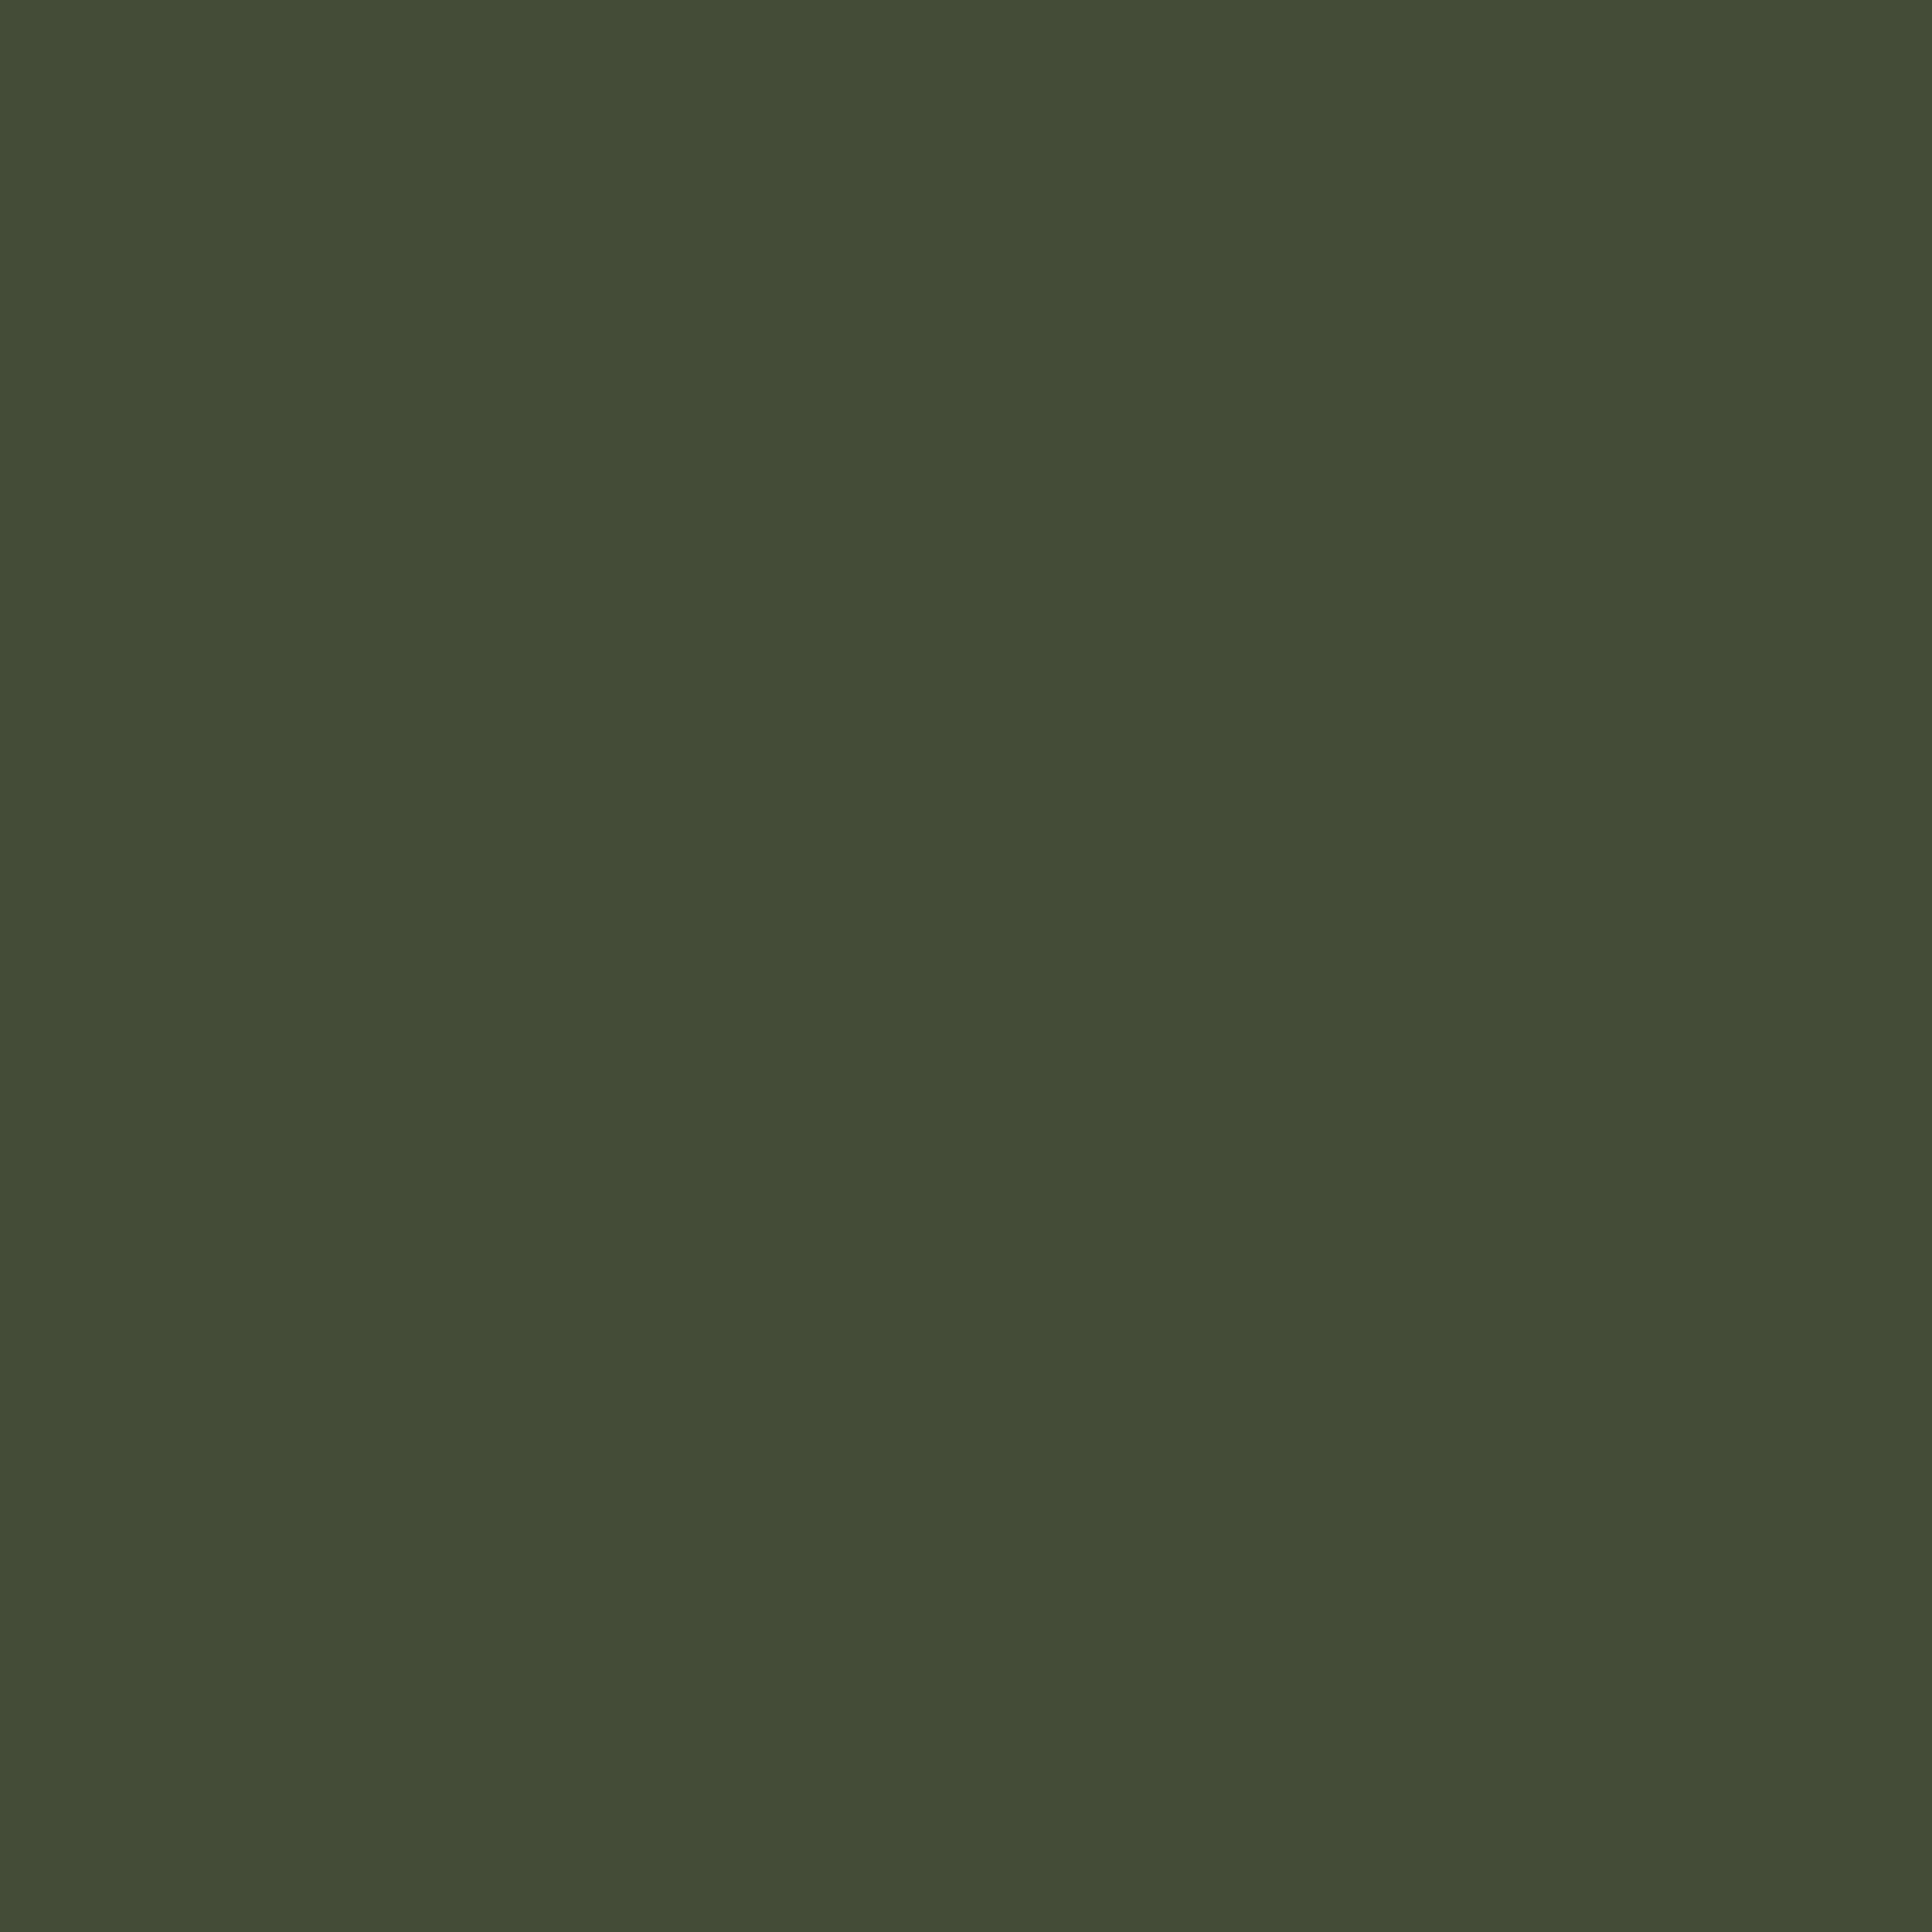 2048x2048 Rifle Green Solid Color Background